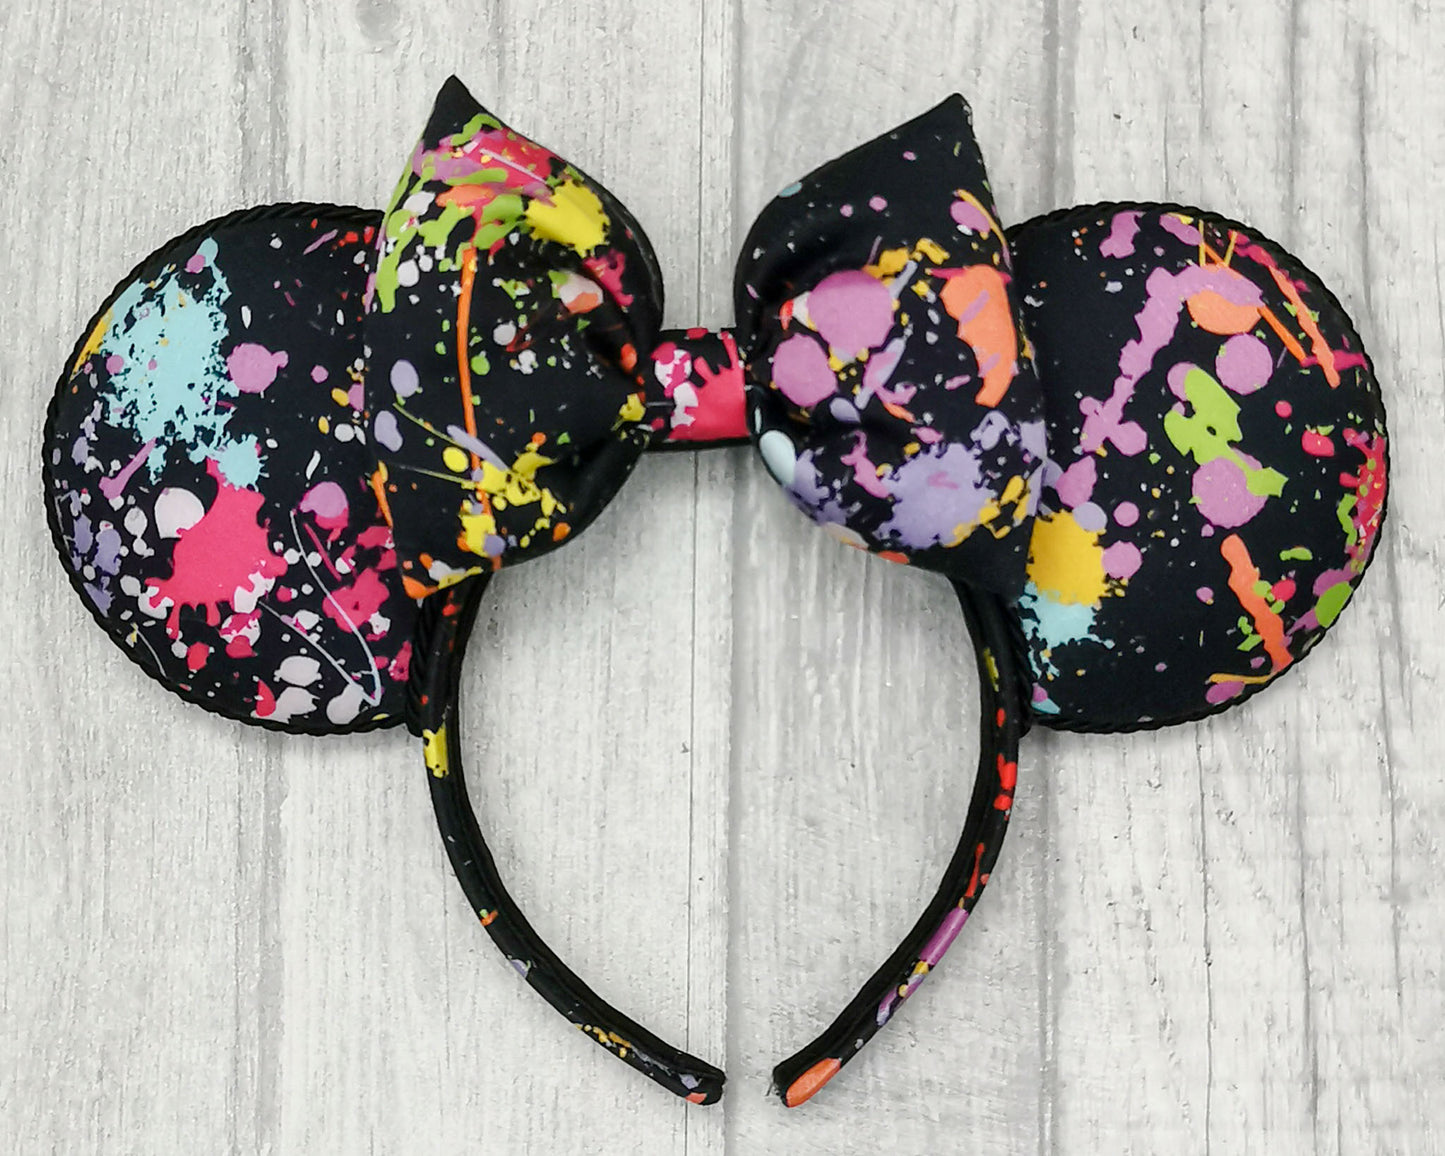 Festival of the Arts Inspired Minnie Mouse Ears Paint Splash Epcot